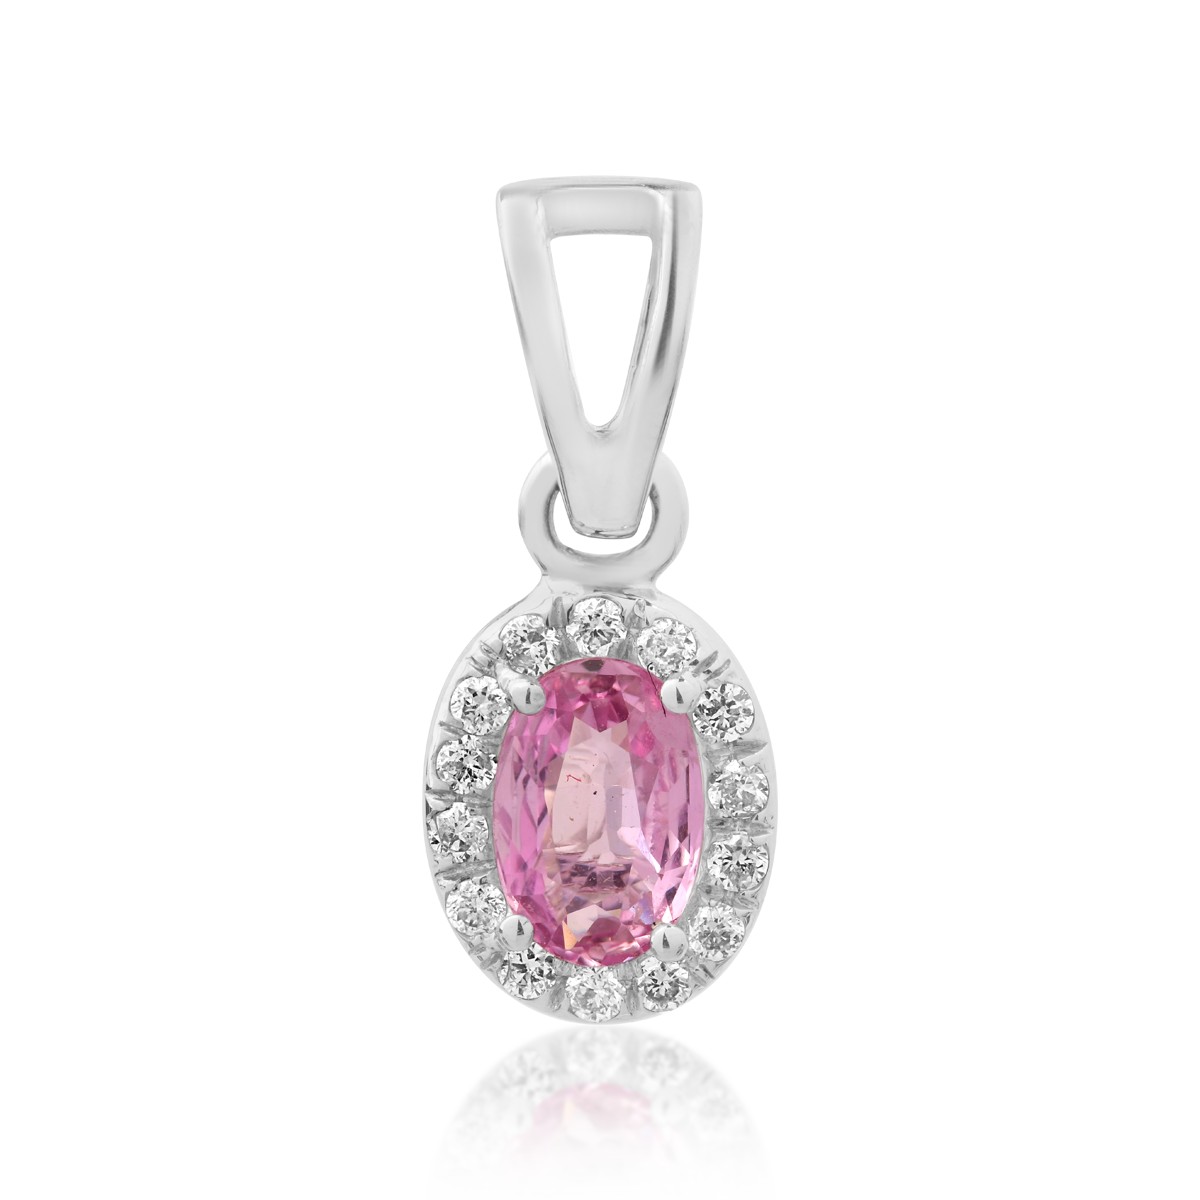 14K white gold pendant with 0.46ct pink sapphire and 0.09ct diamonds